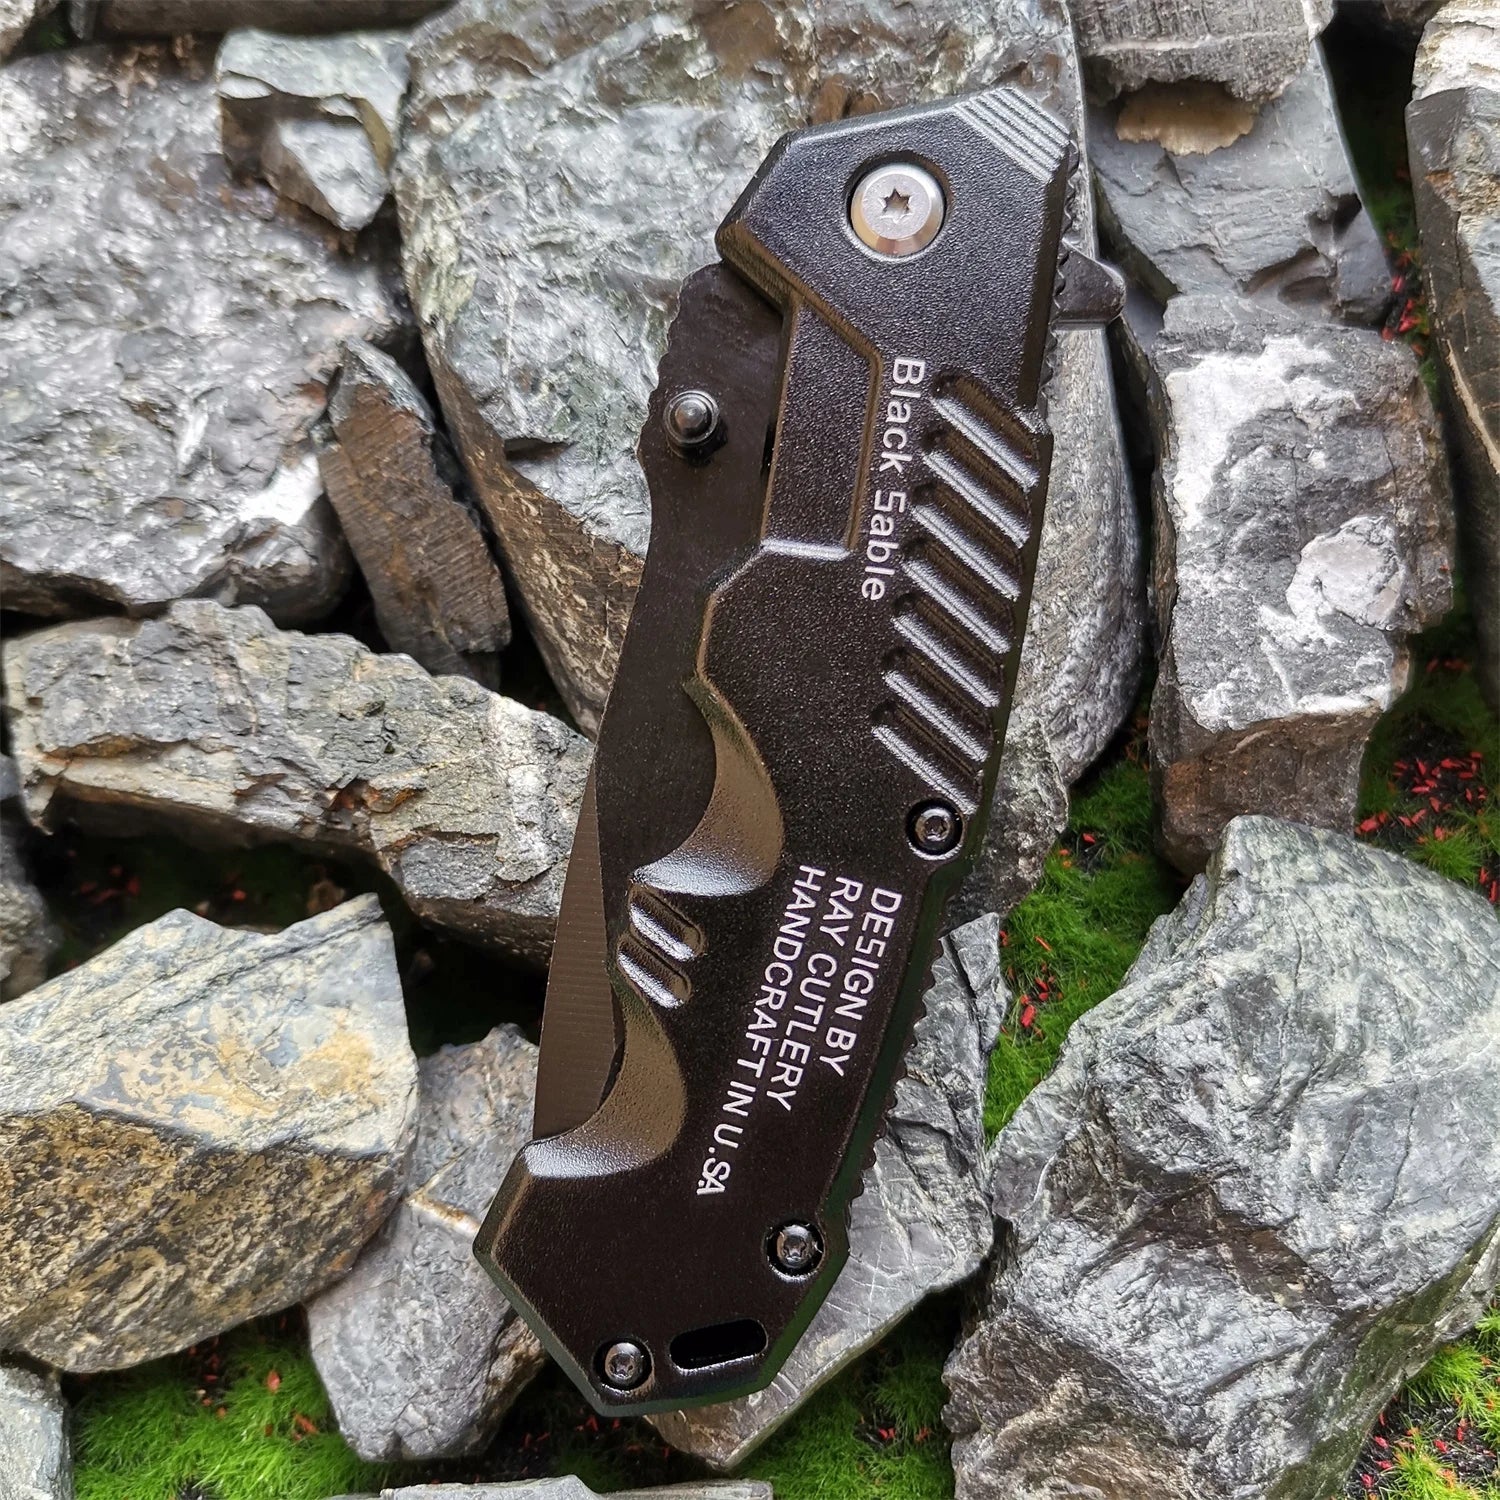 Folding Knife Tactical Survival Knives Hunting Camping Outdoor High Hardness Survival Self-Defense Knife Tool